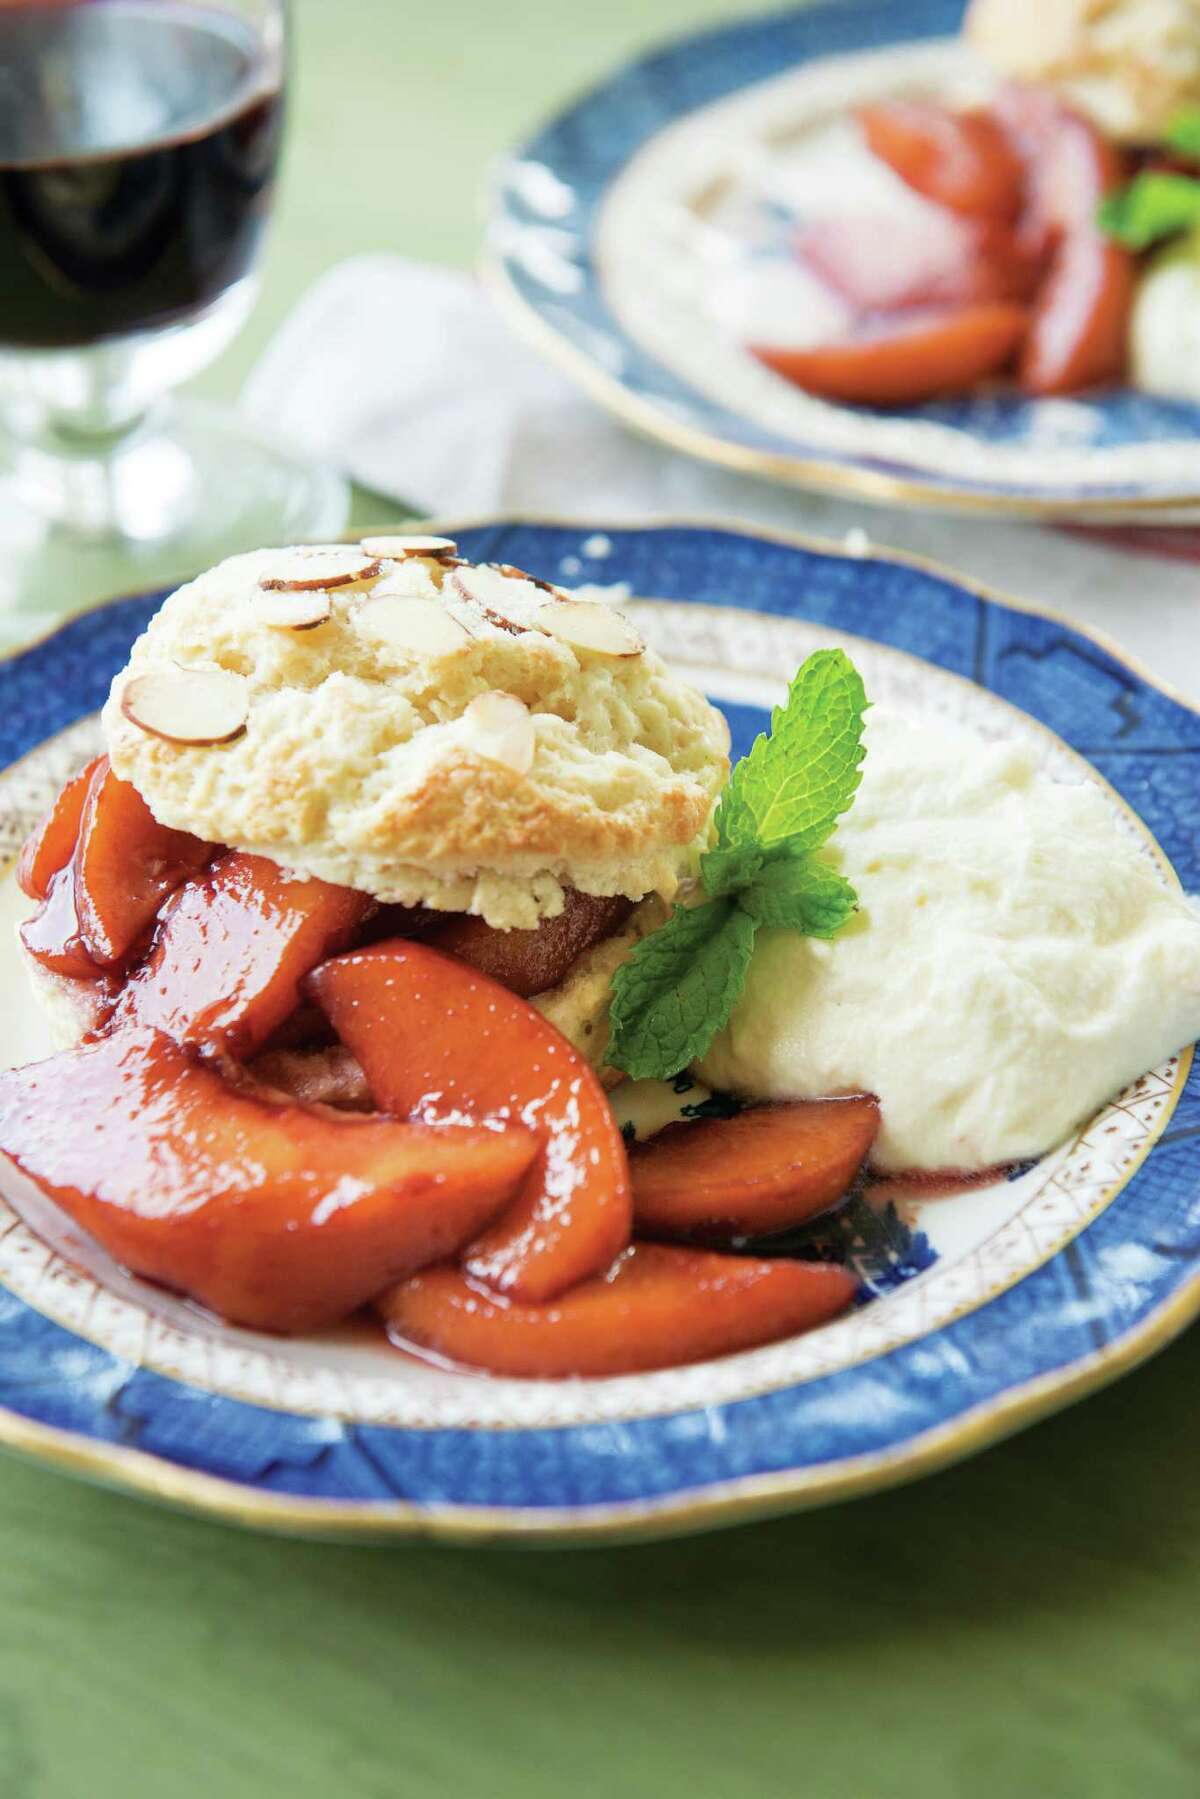 Almond Buttermilk Shortcakes with Peaches Poached in Red Wine & White Chocolate Whipped Cream are featured in "Julia Reed's South" (Rizzoli, $50).